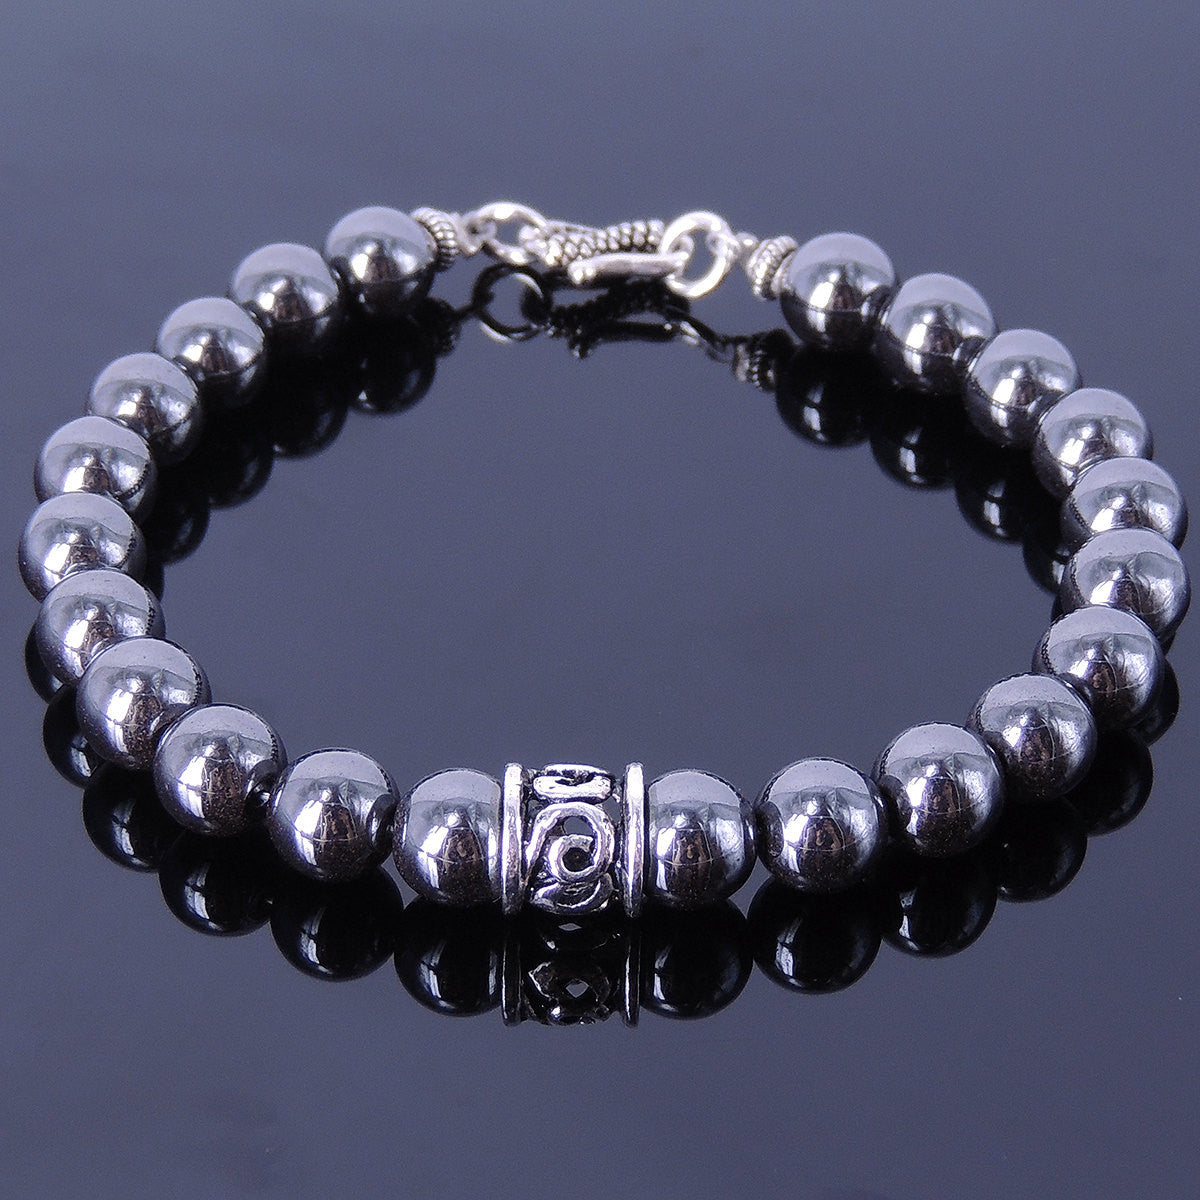 6mm Hematite Gemstone Bracelet with S925 Sterling Silver Buddhism Barrel Bead Spacers & Clasp - Handmade by Gem & Silver BR142